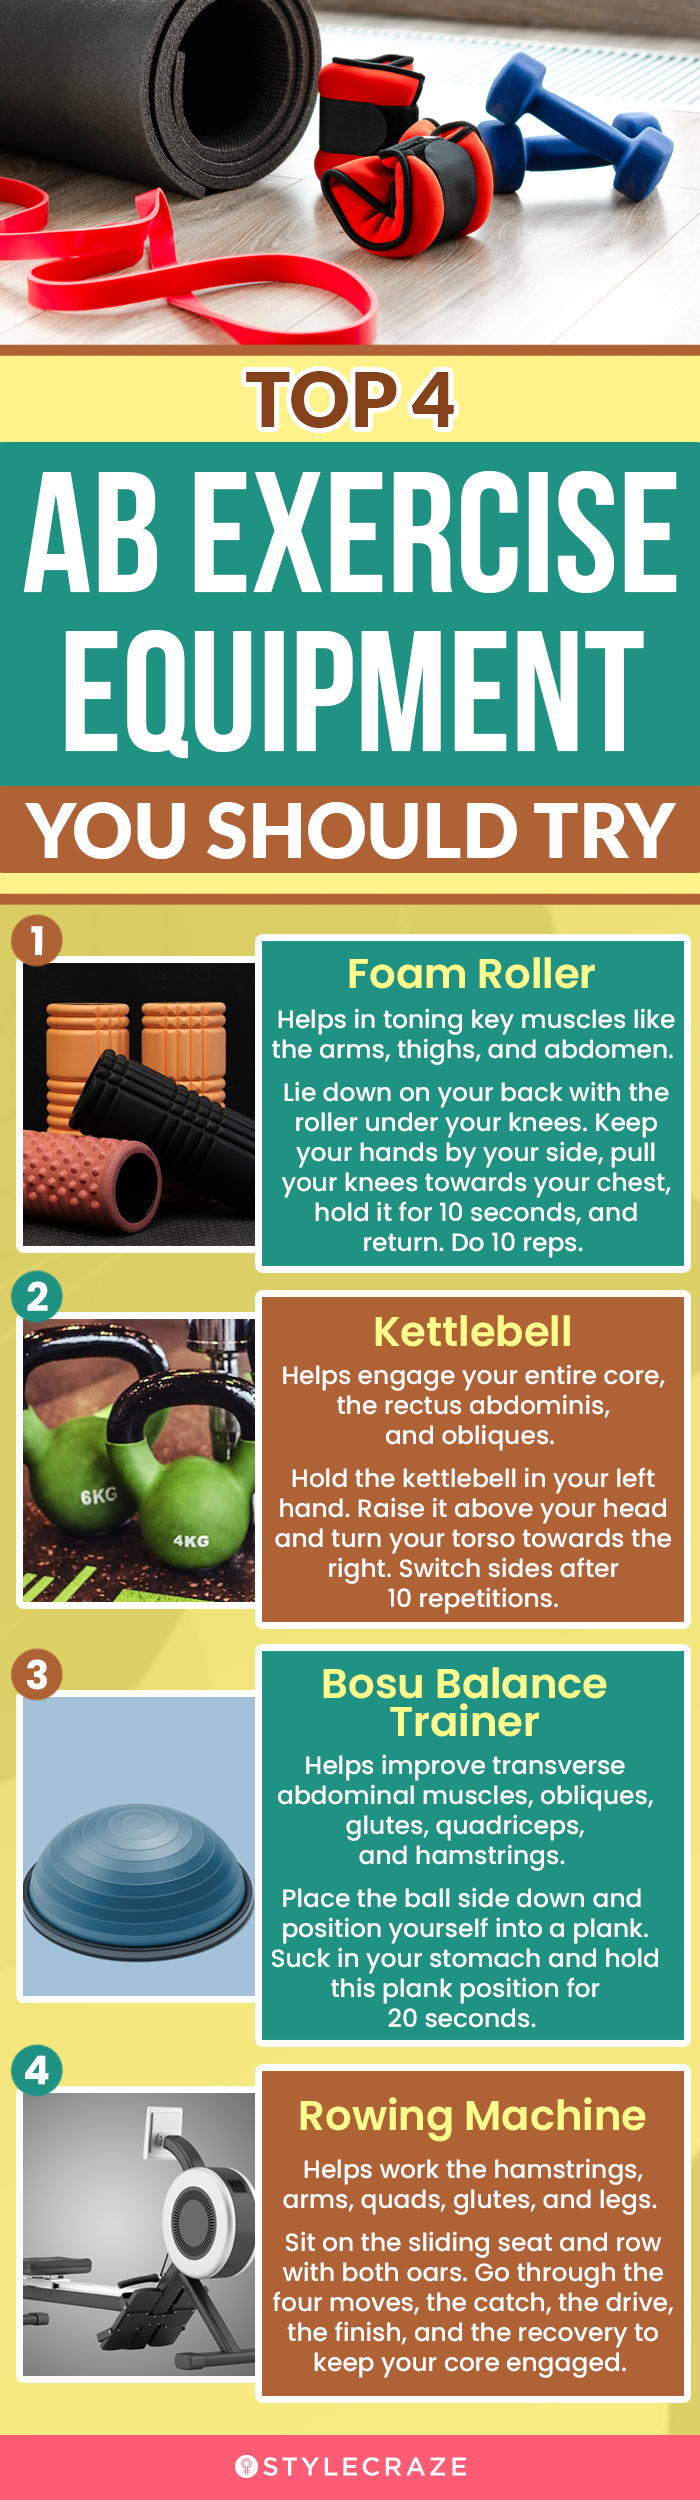 top 4 ab exercise equipments you should try [infographic]